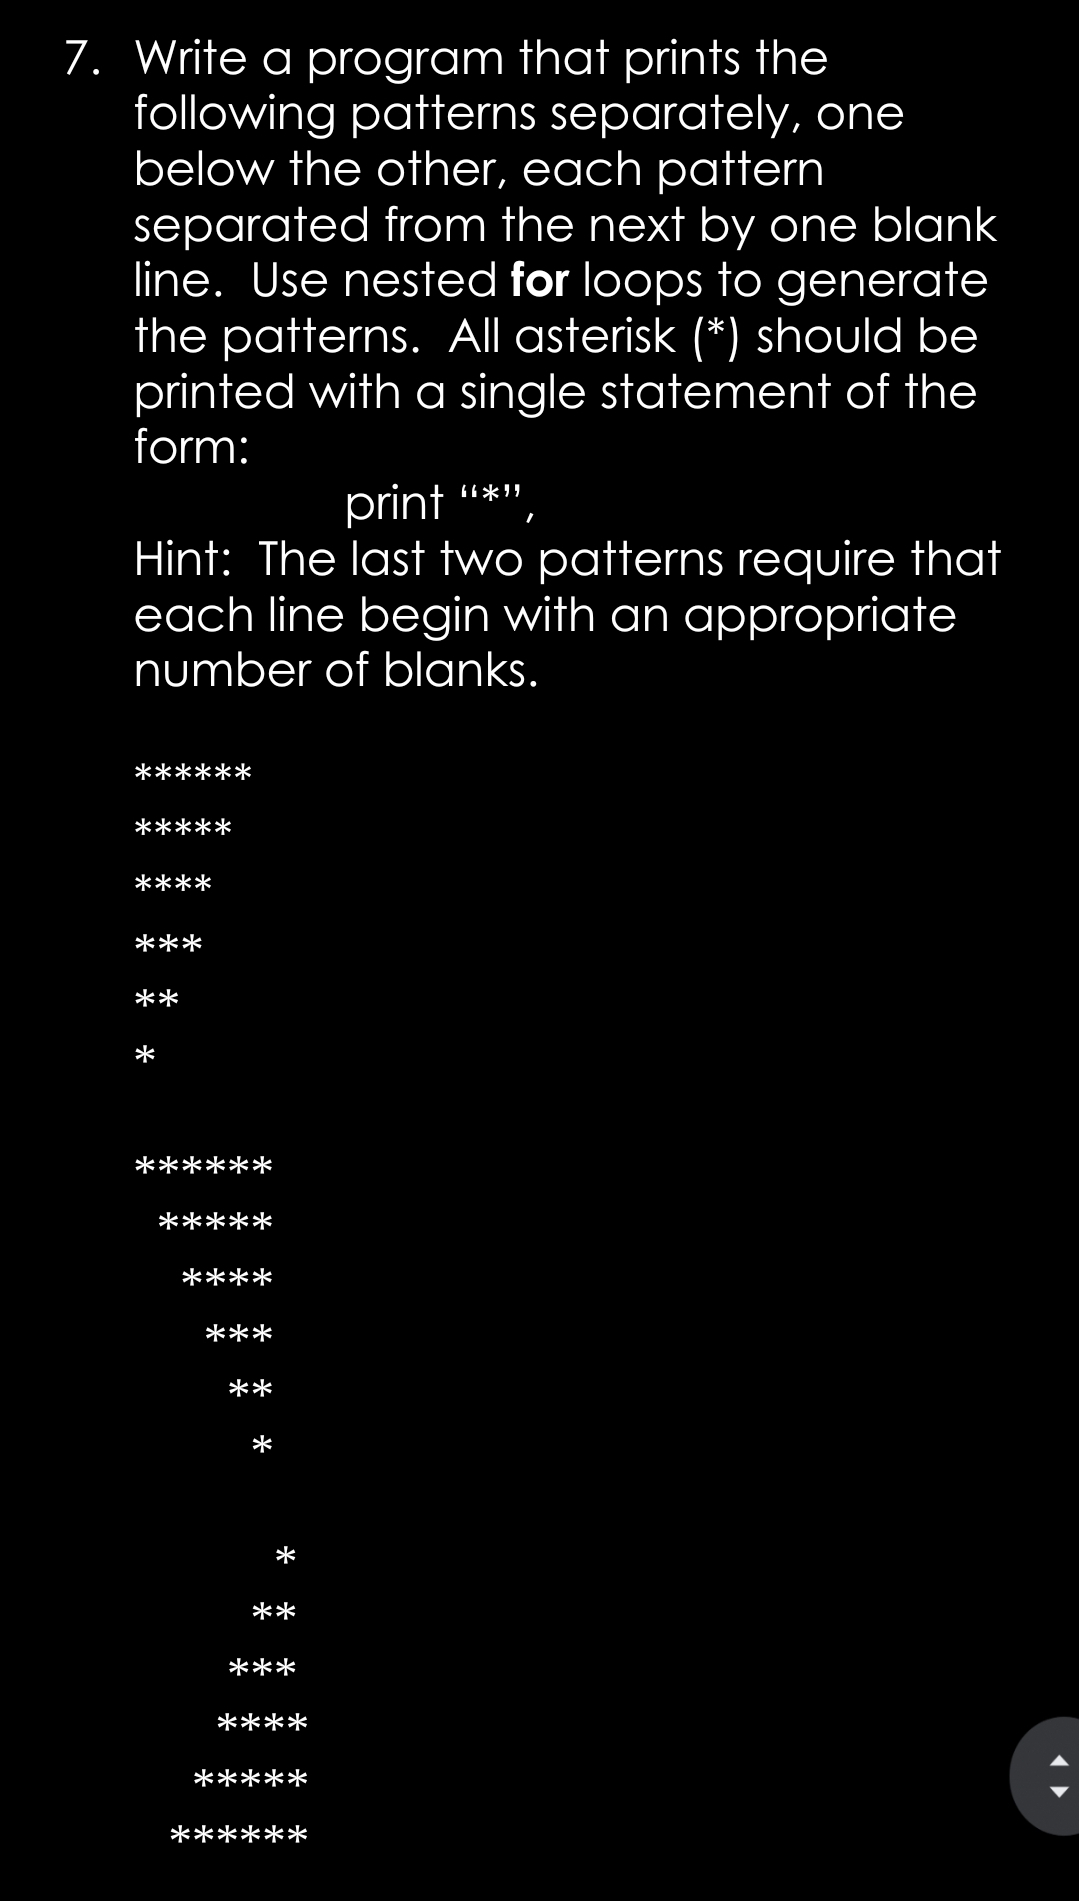 7. Write a program that prints the
following patterns separately, one
below the other, each pattern
separated from the next by one blank
line. Use nested for loops to generate
the patterns. All asterisk (*) should be
printed with a single statement of the
form:
print
Hint: The last two patterns require that
each line begin with an appropriate
number of blanks.
*****
****
***
**
*
******
*****
****
***
**
*
**
***
****
*****
******
